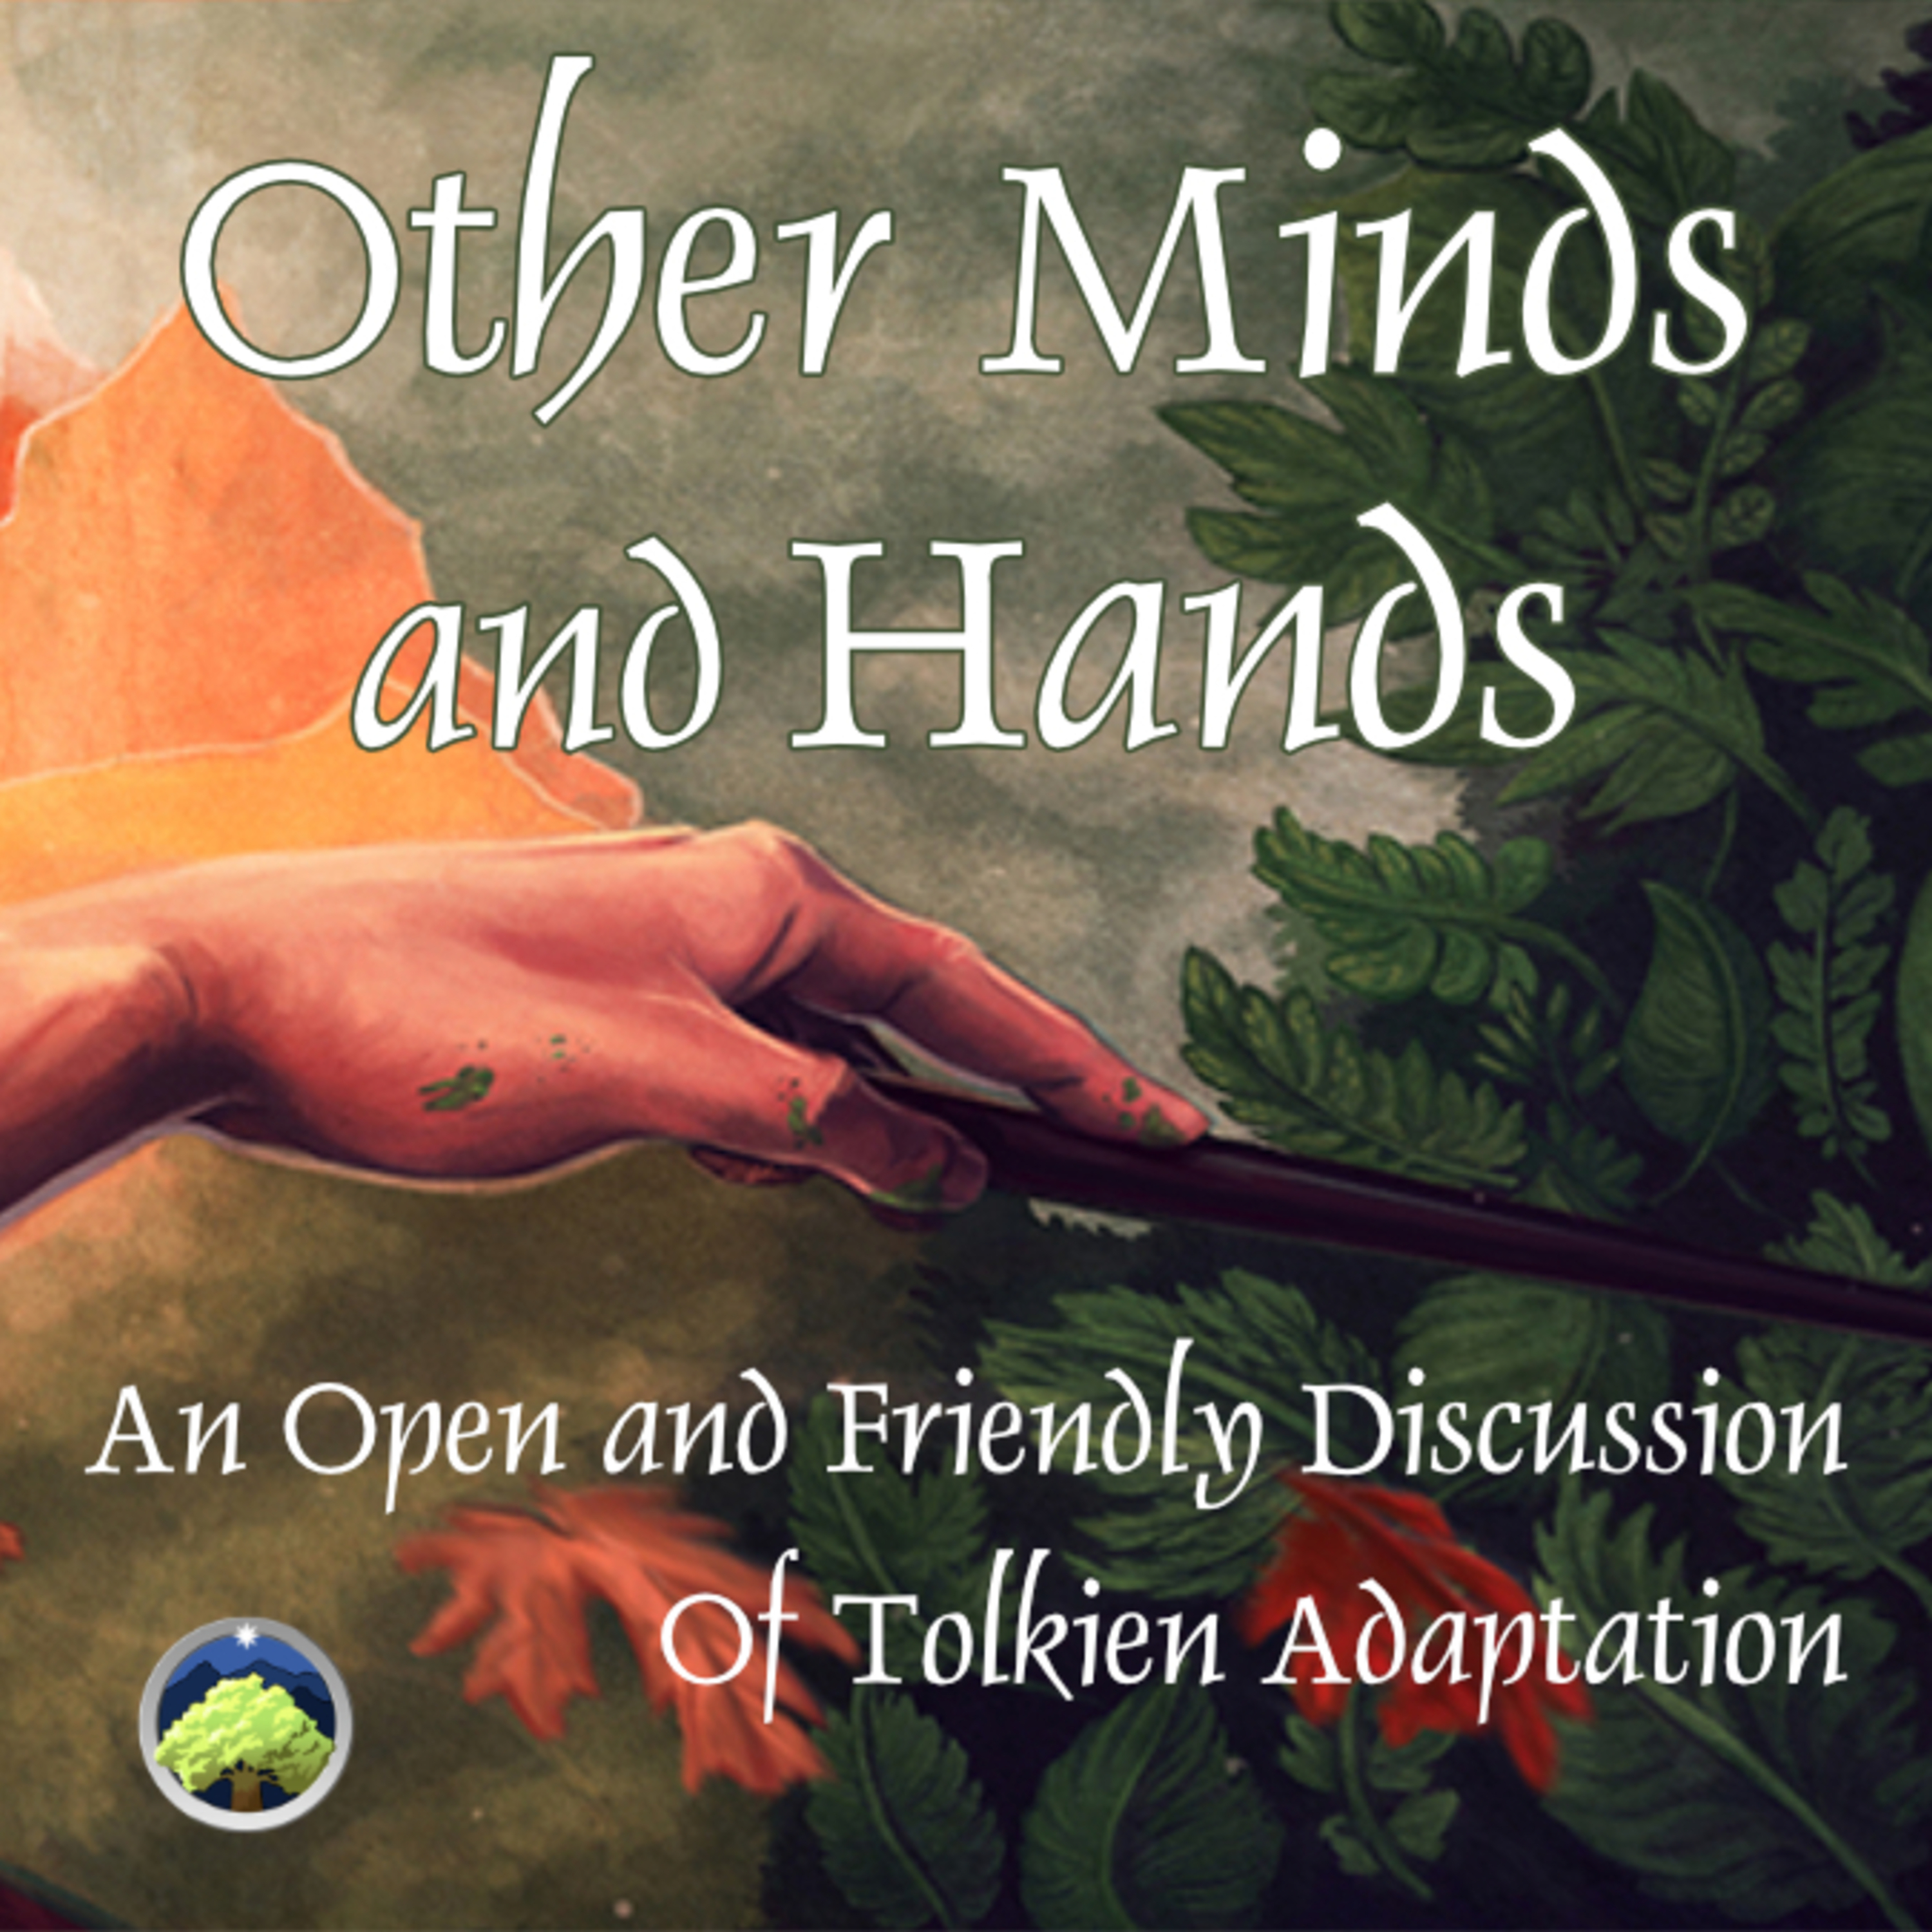 516: Other Minds and Hands, Episode 36